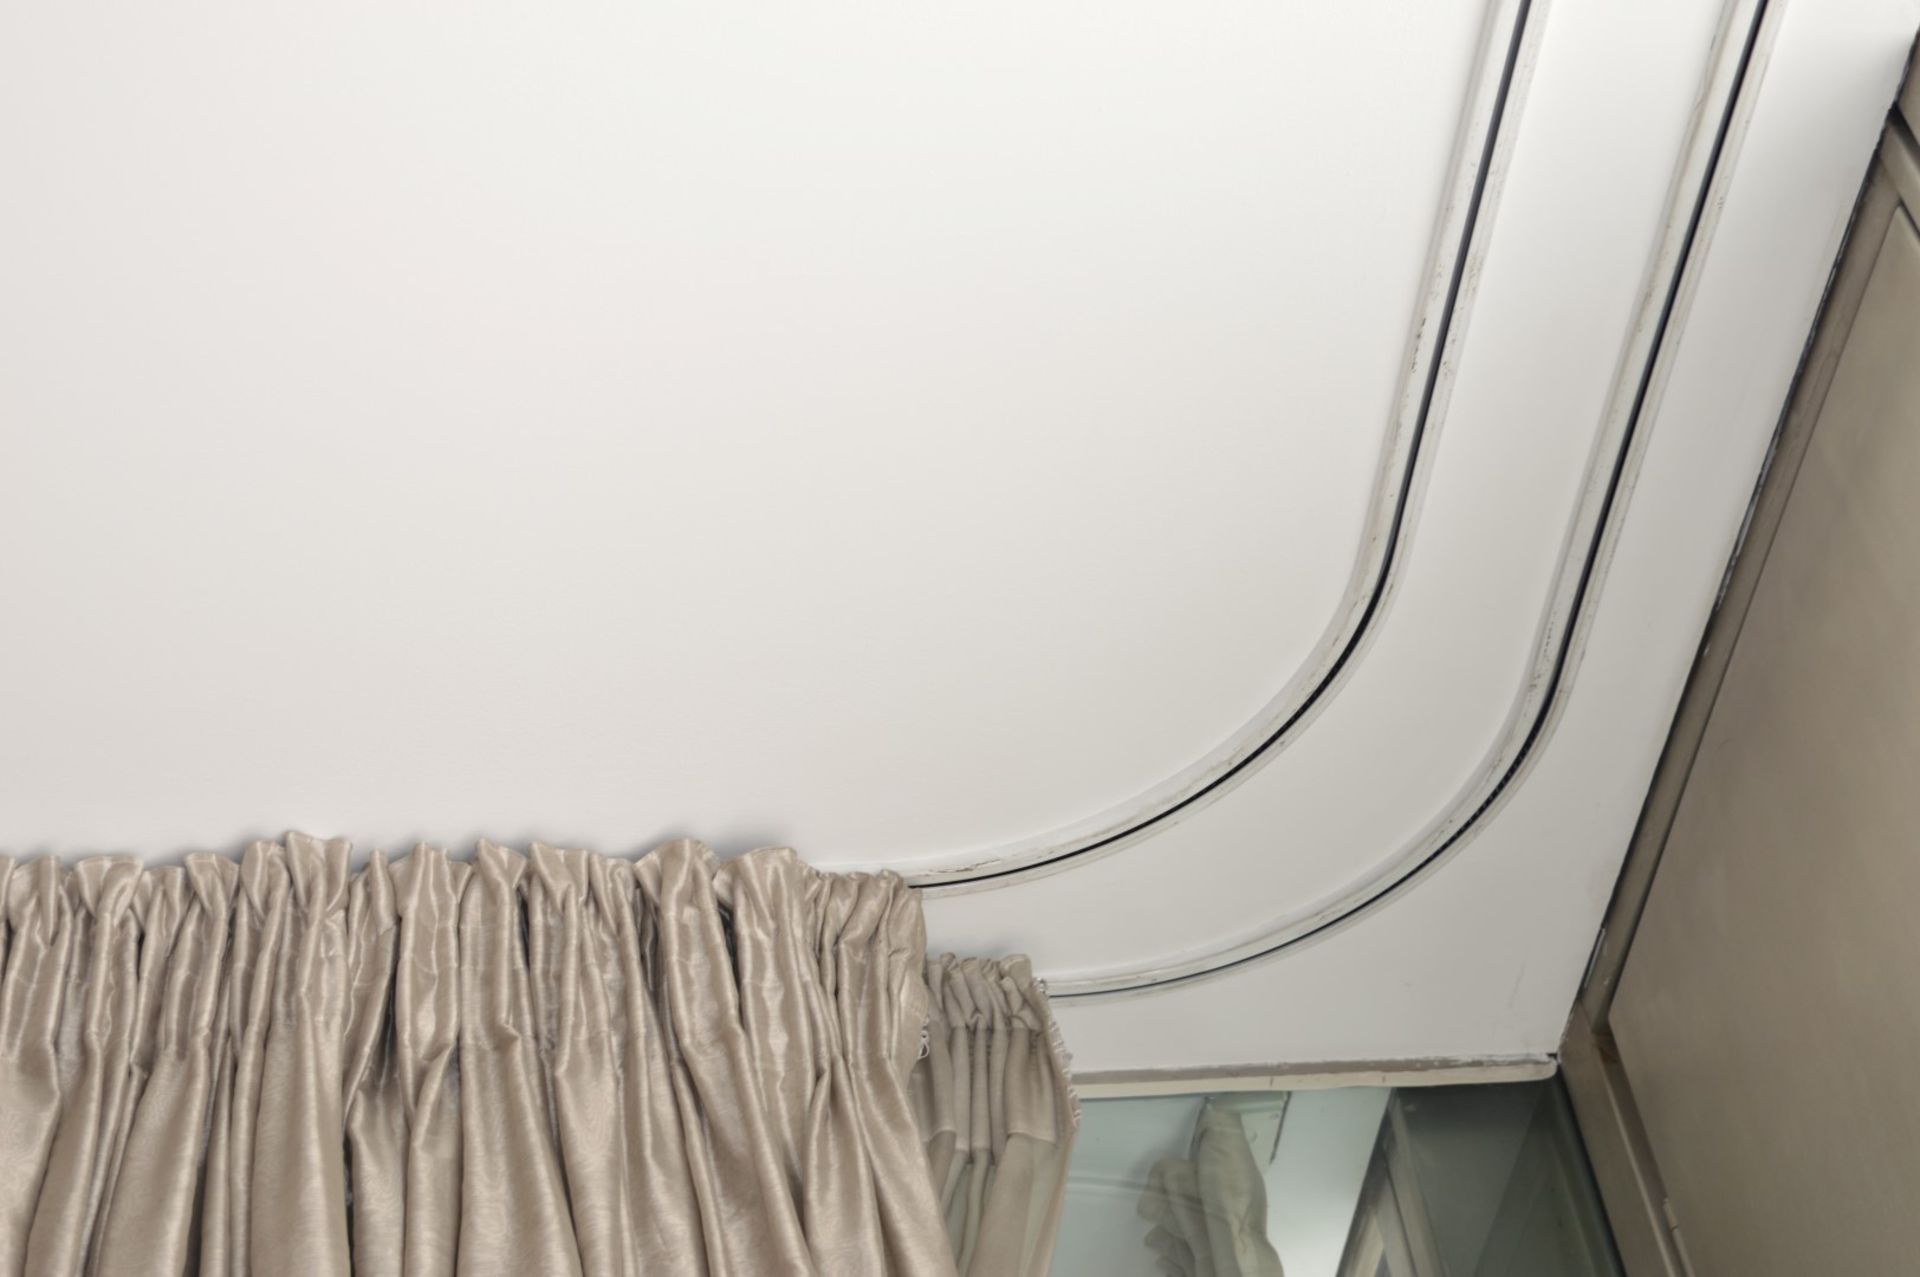 1 x Set of Curtains With Electric Motor - Ref 73 - Approx Length 800cm x Drop 307 cms - CL230 - - Image 6 of 7